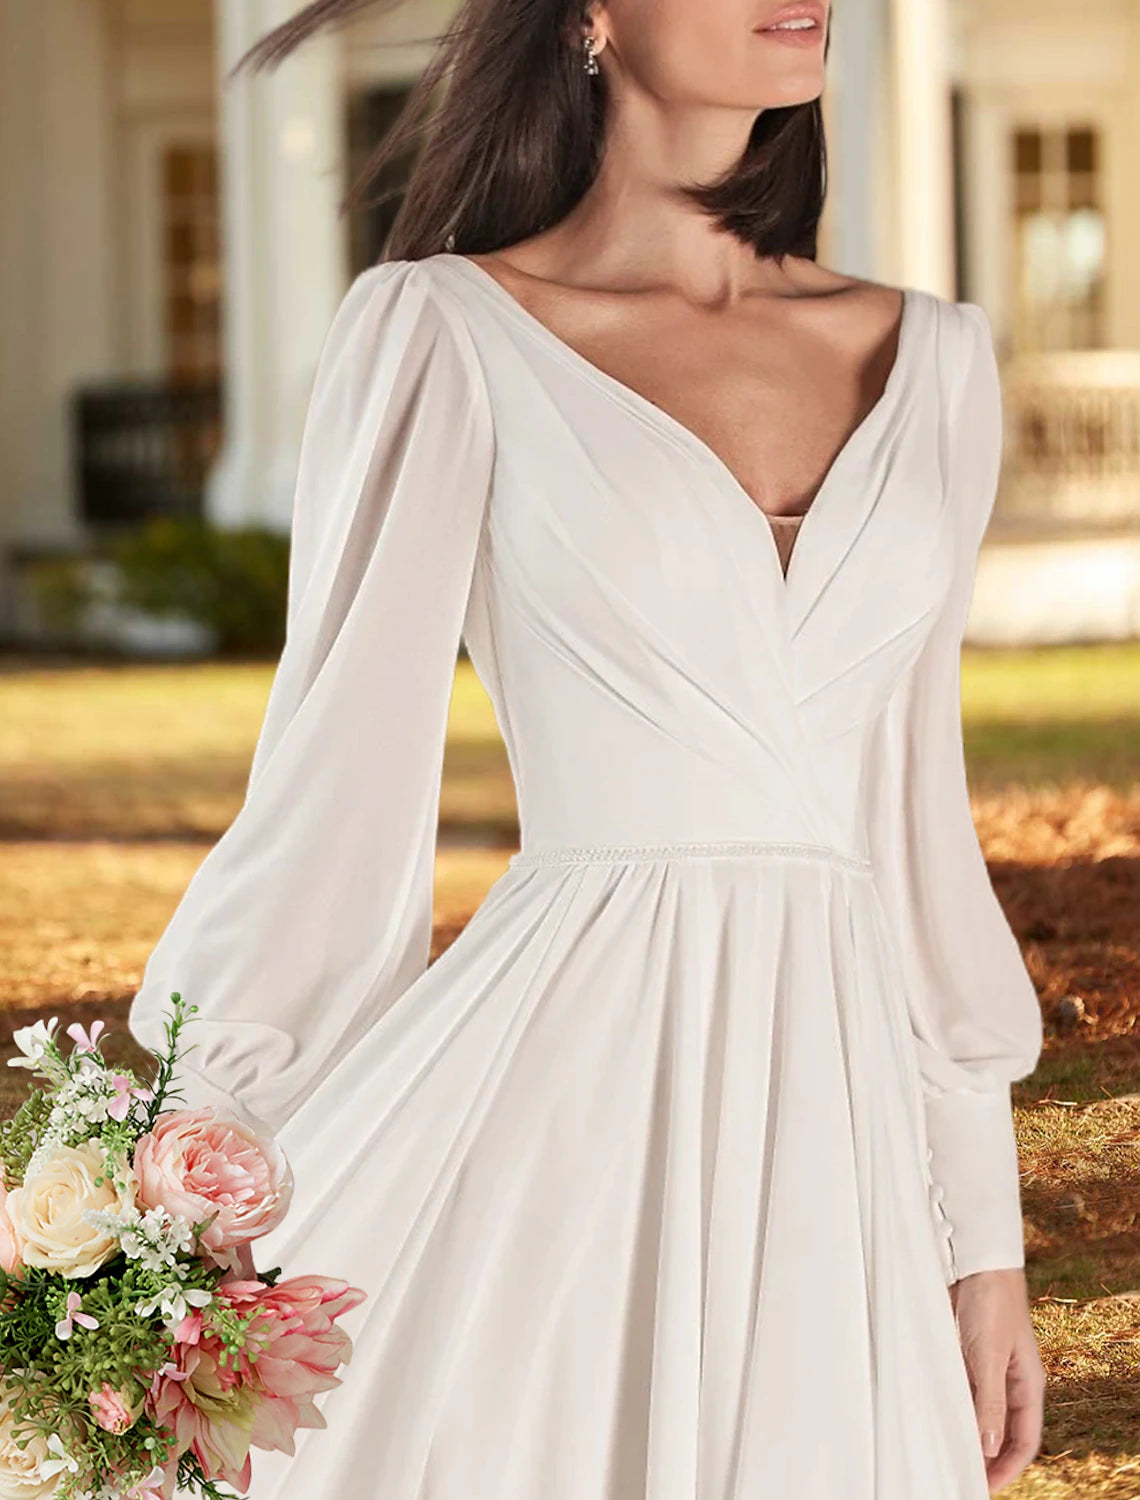 Simple Wedding Dresses A-Line V Neck Long Sleeve Sweep / Brush Train Chiffon Bridal Gowns With Pleats